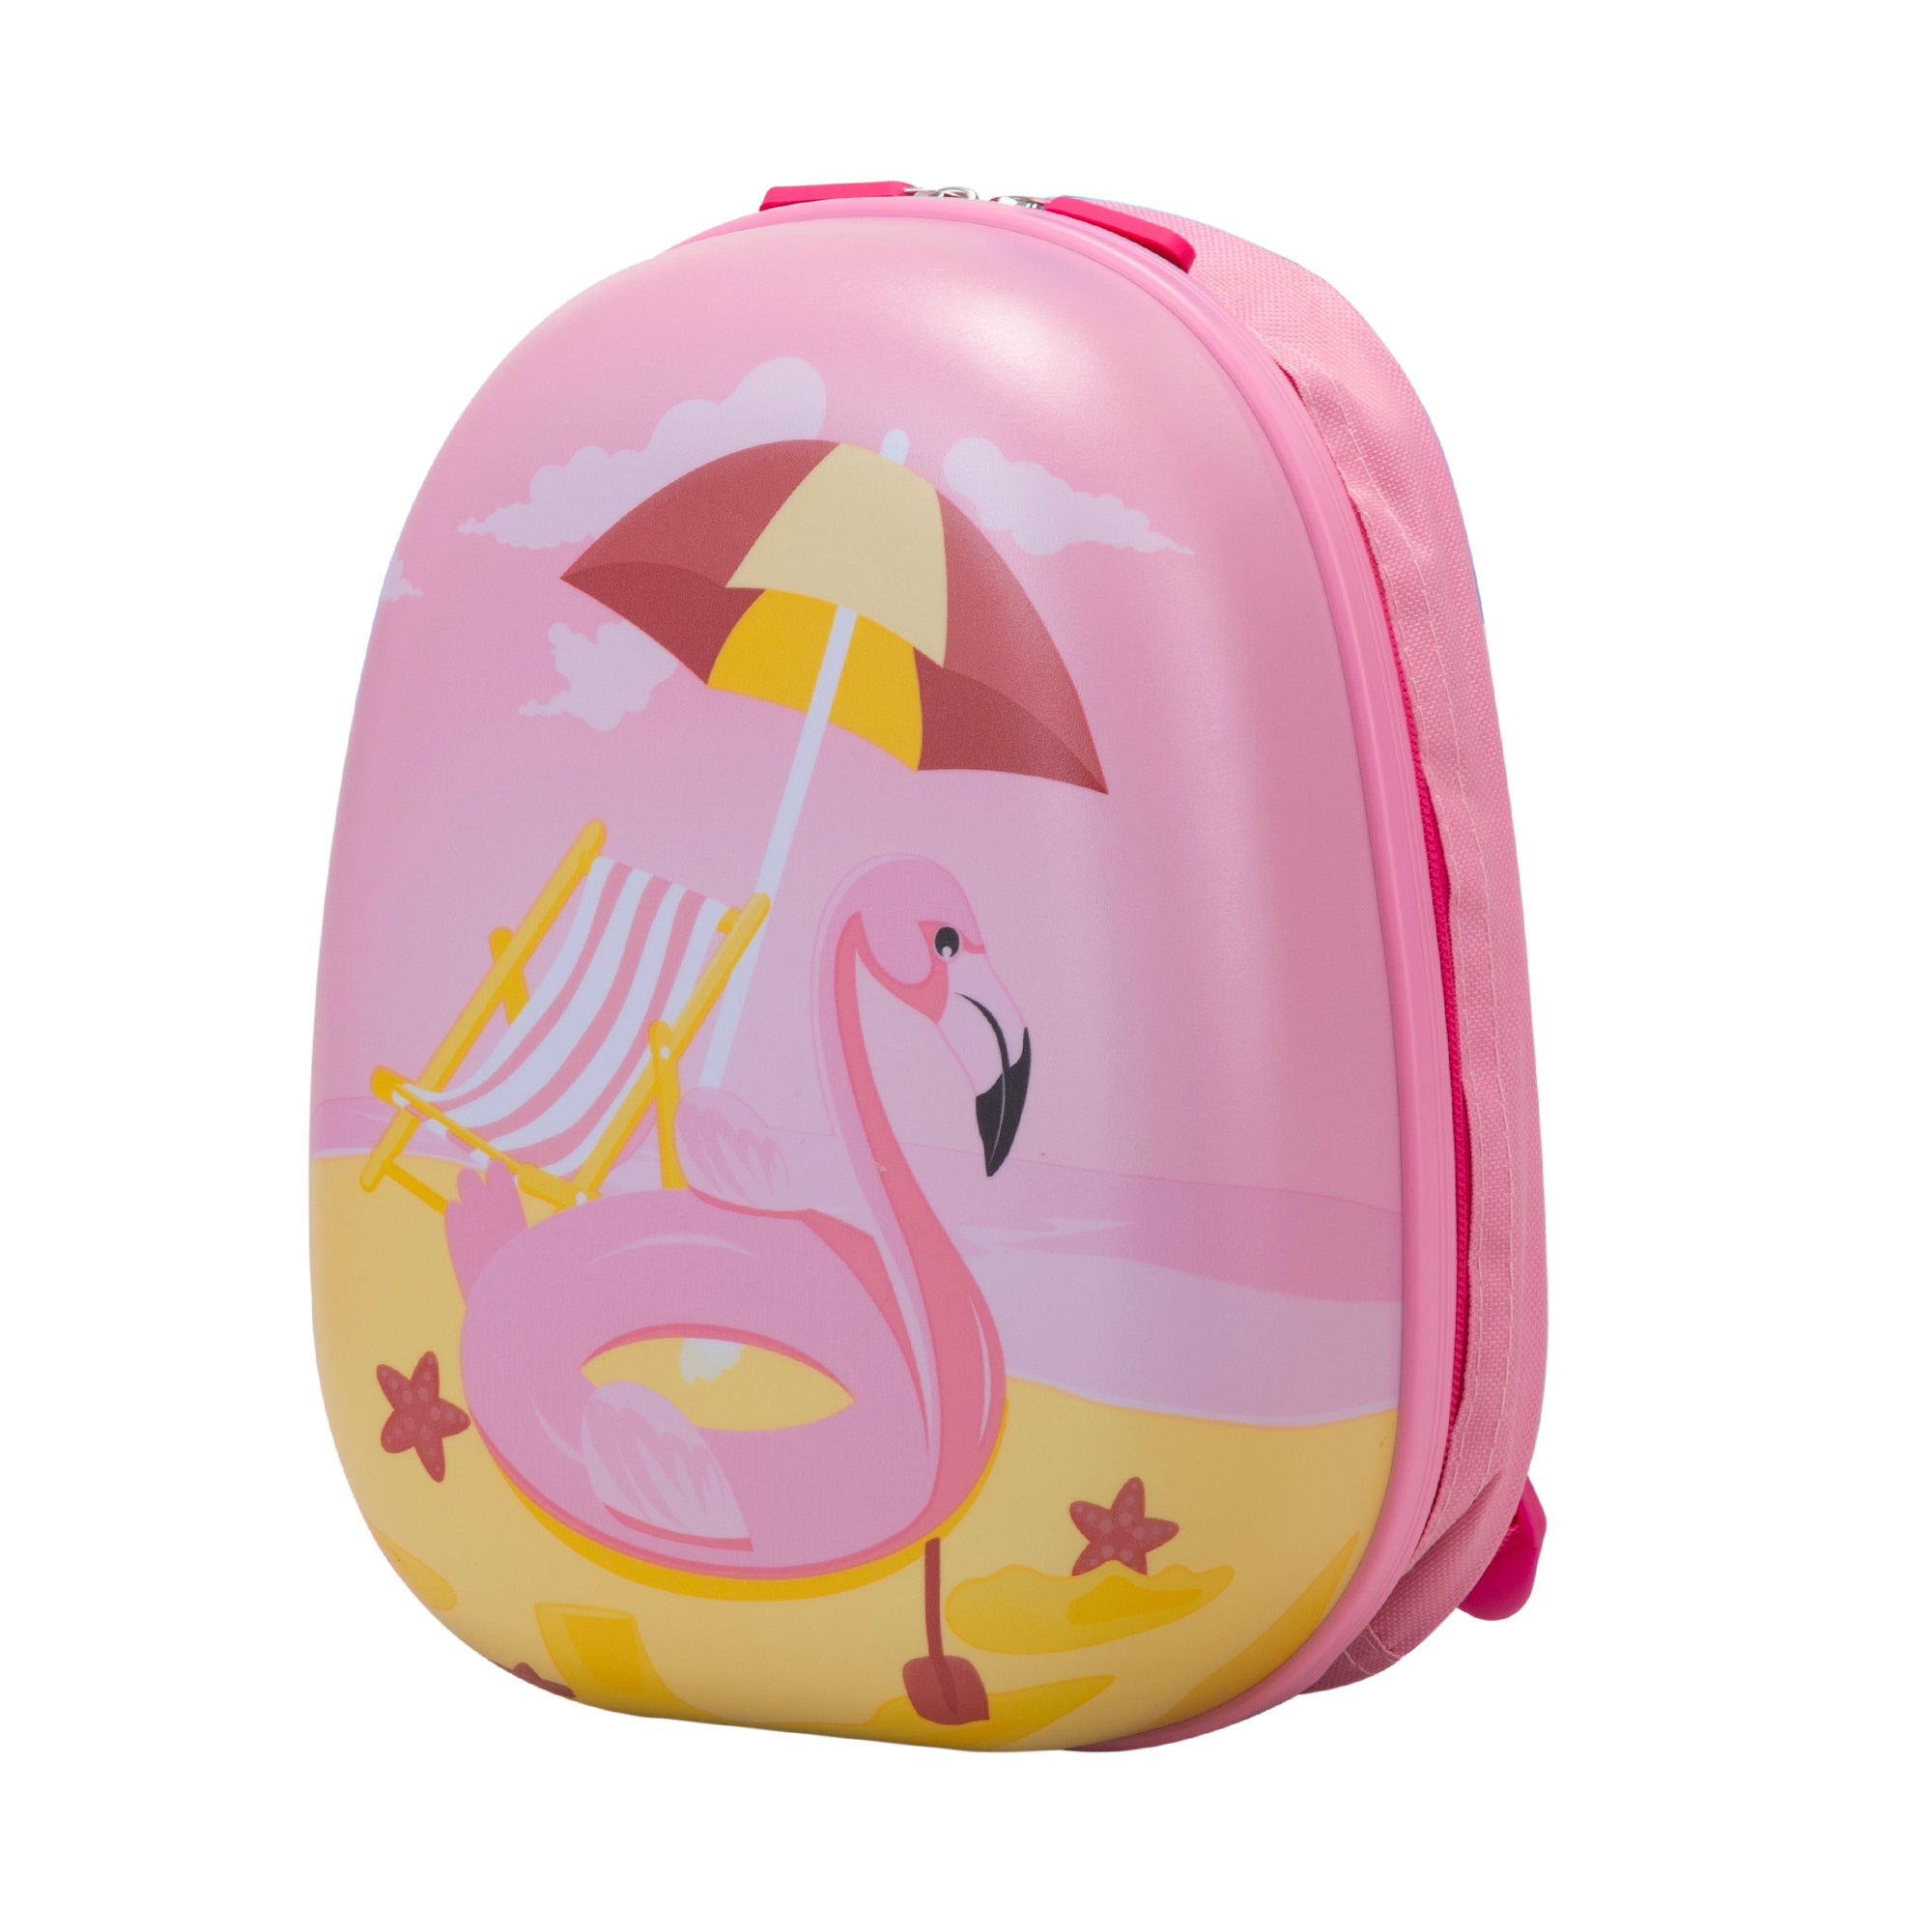 2PCS Kids Luggage Set with 16" Rolling Suitcase and pink-abs+pc